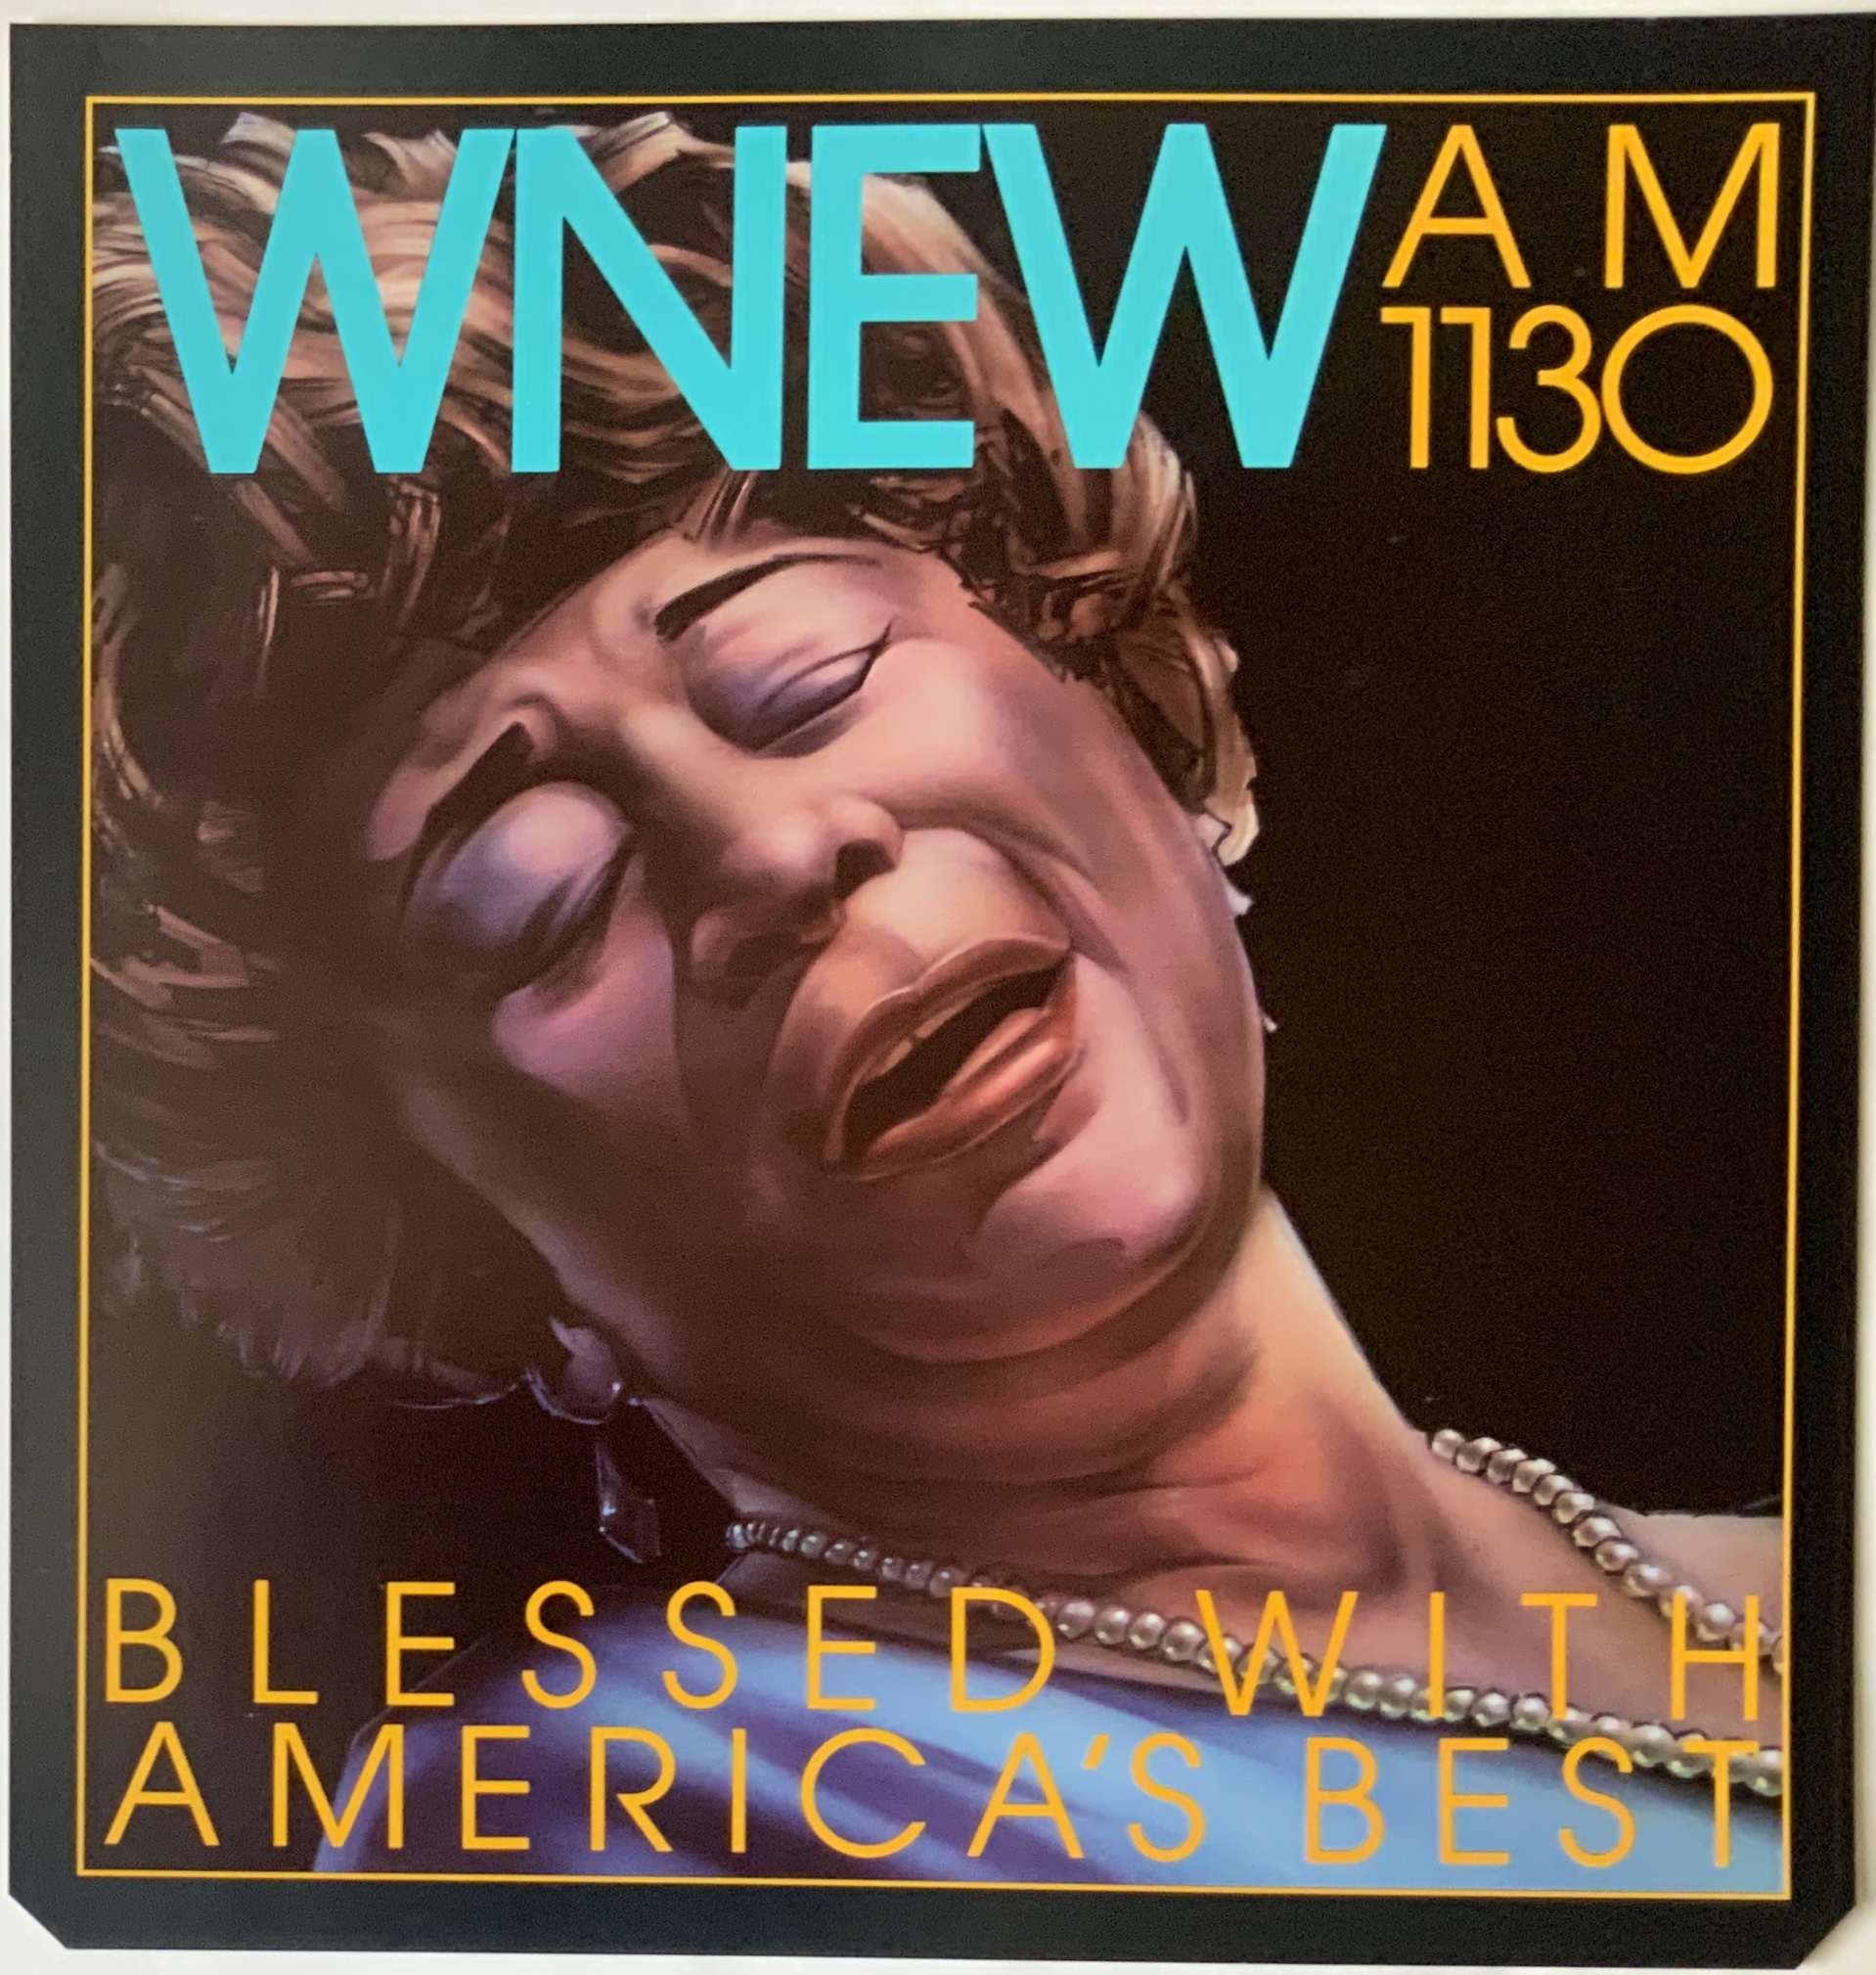 M642	WNEW AM 1130: BLESSED WITH AMERICA’S BEST - ELLA FITZGERALD - SUBWAY POSTER CA. 1985